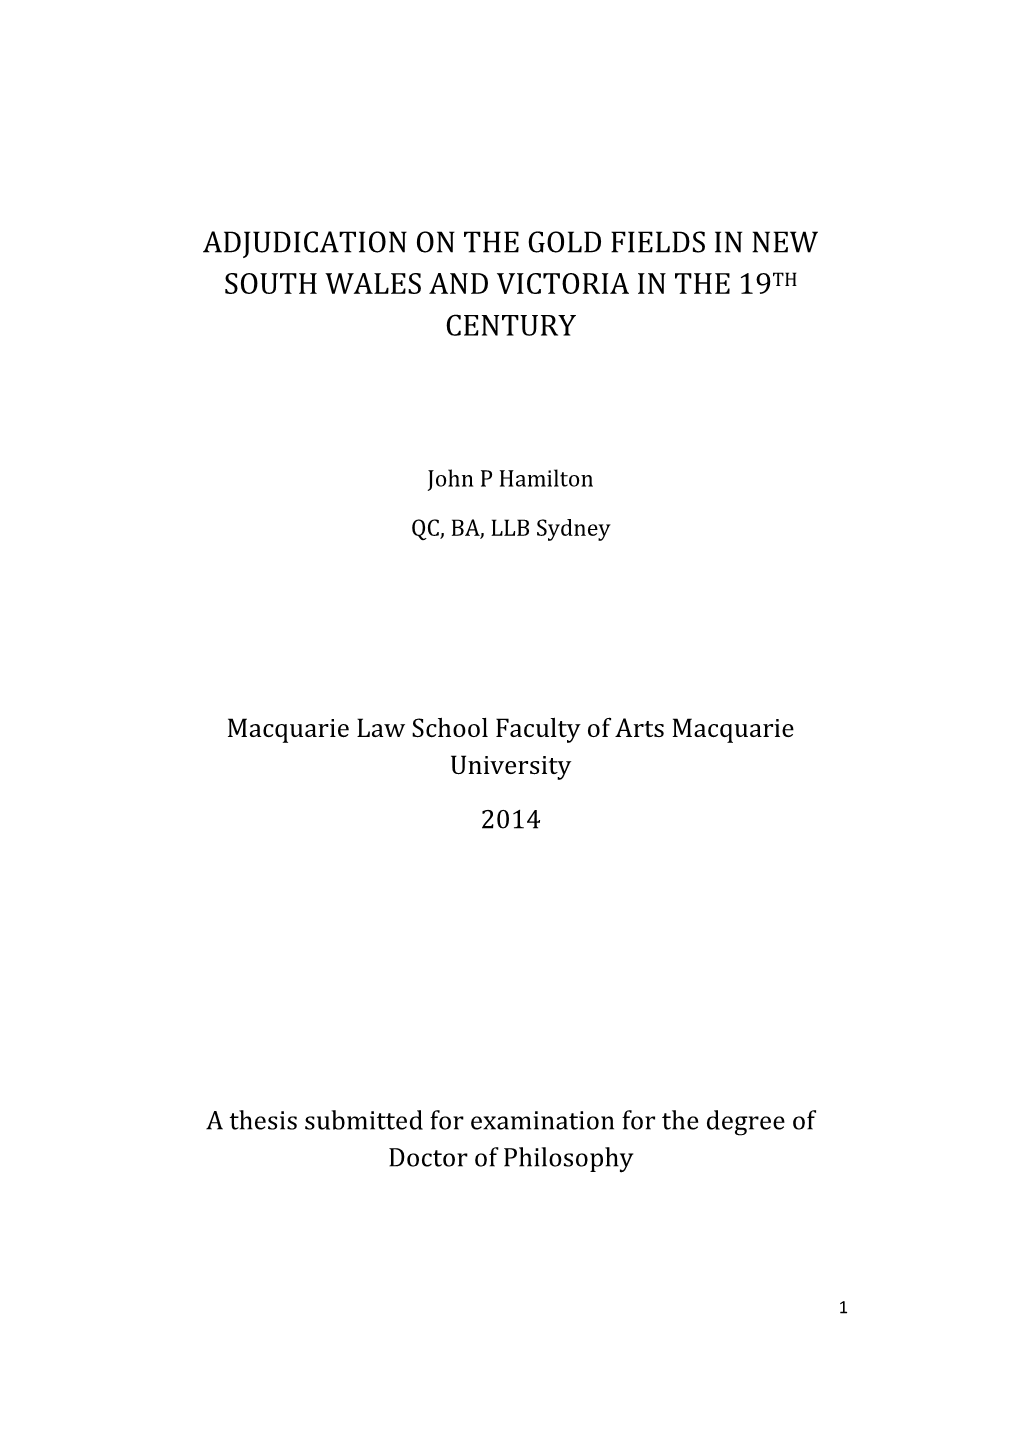 Adjudication on the Gold Fields in New South Wales and Victoria in the 19Th Century